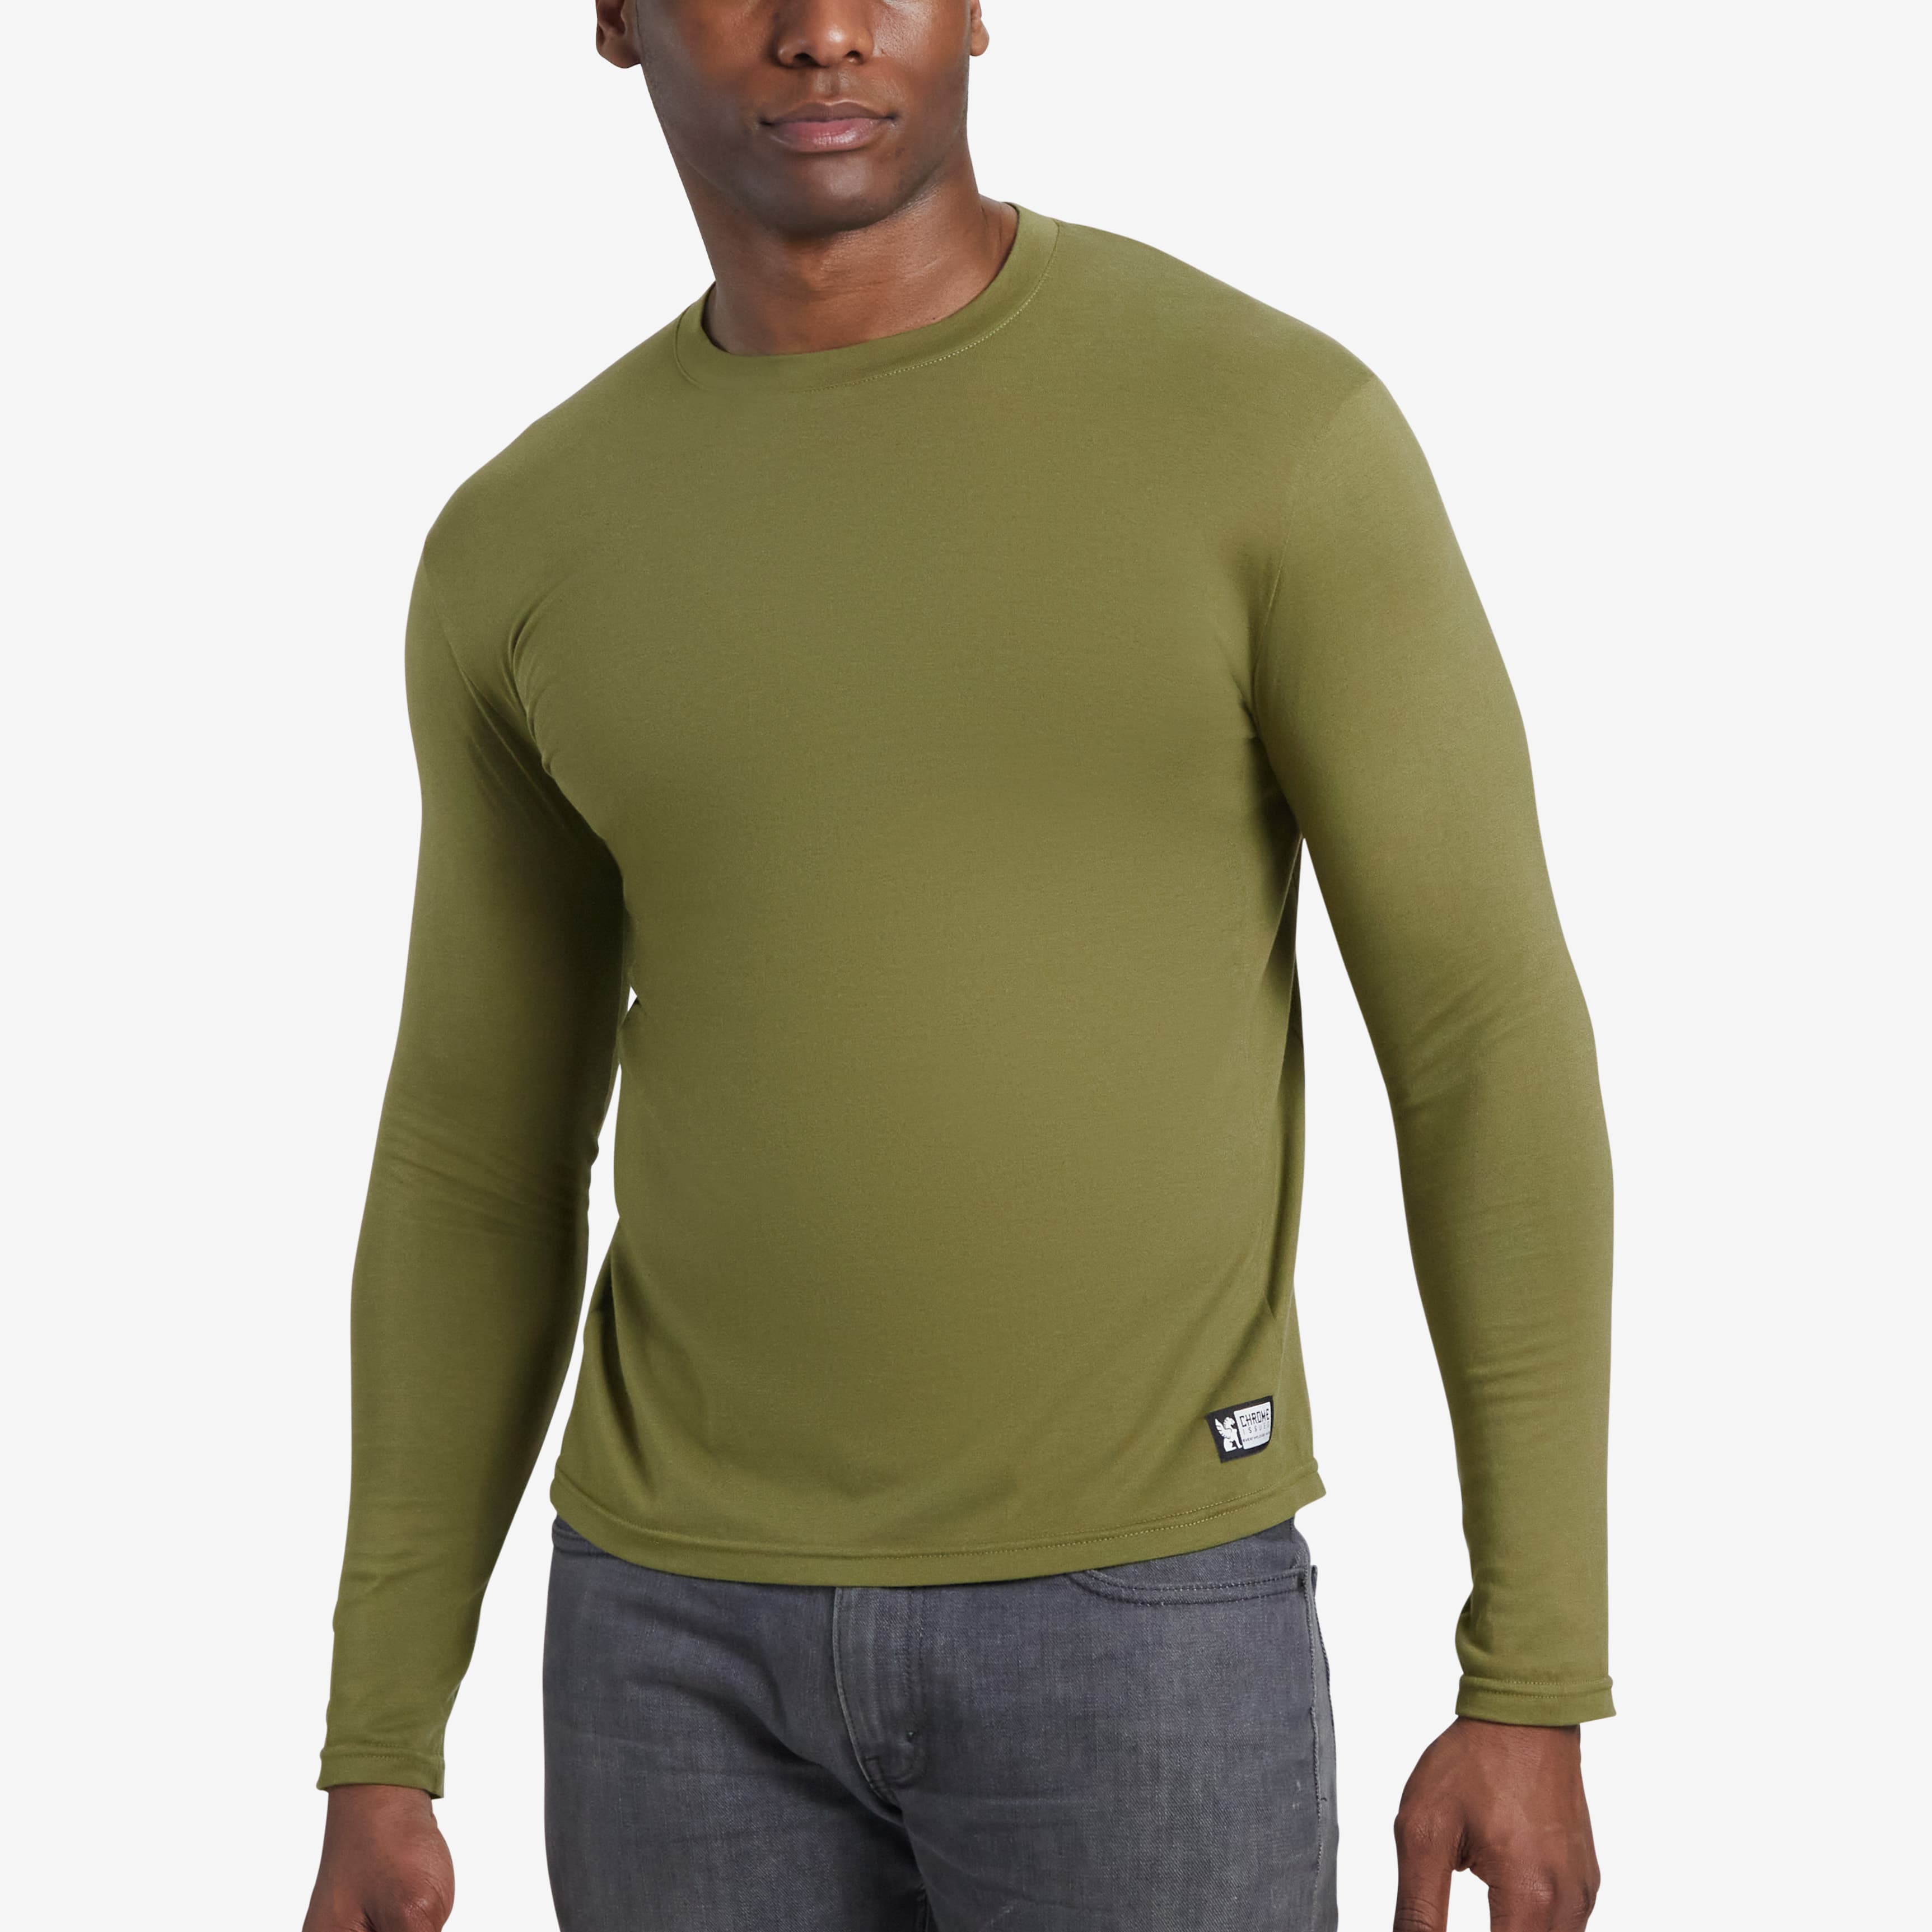 Men's Chrome basics long sleeve T-shirt in green worn by a man #color_olive branch